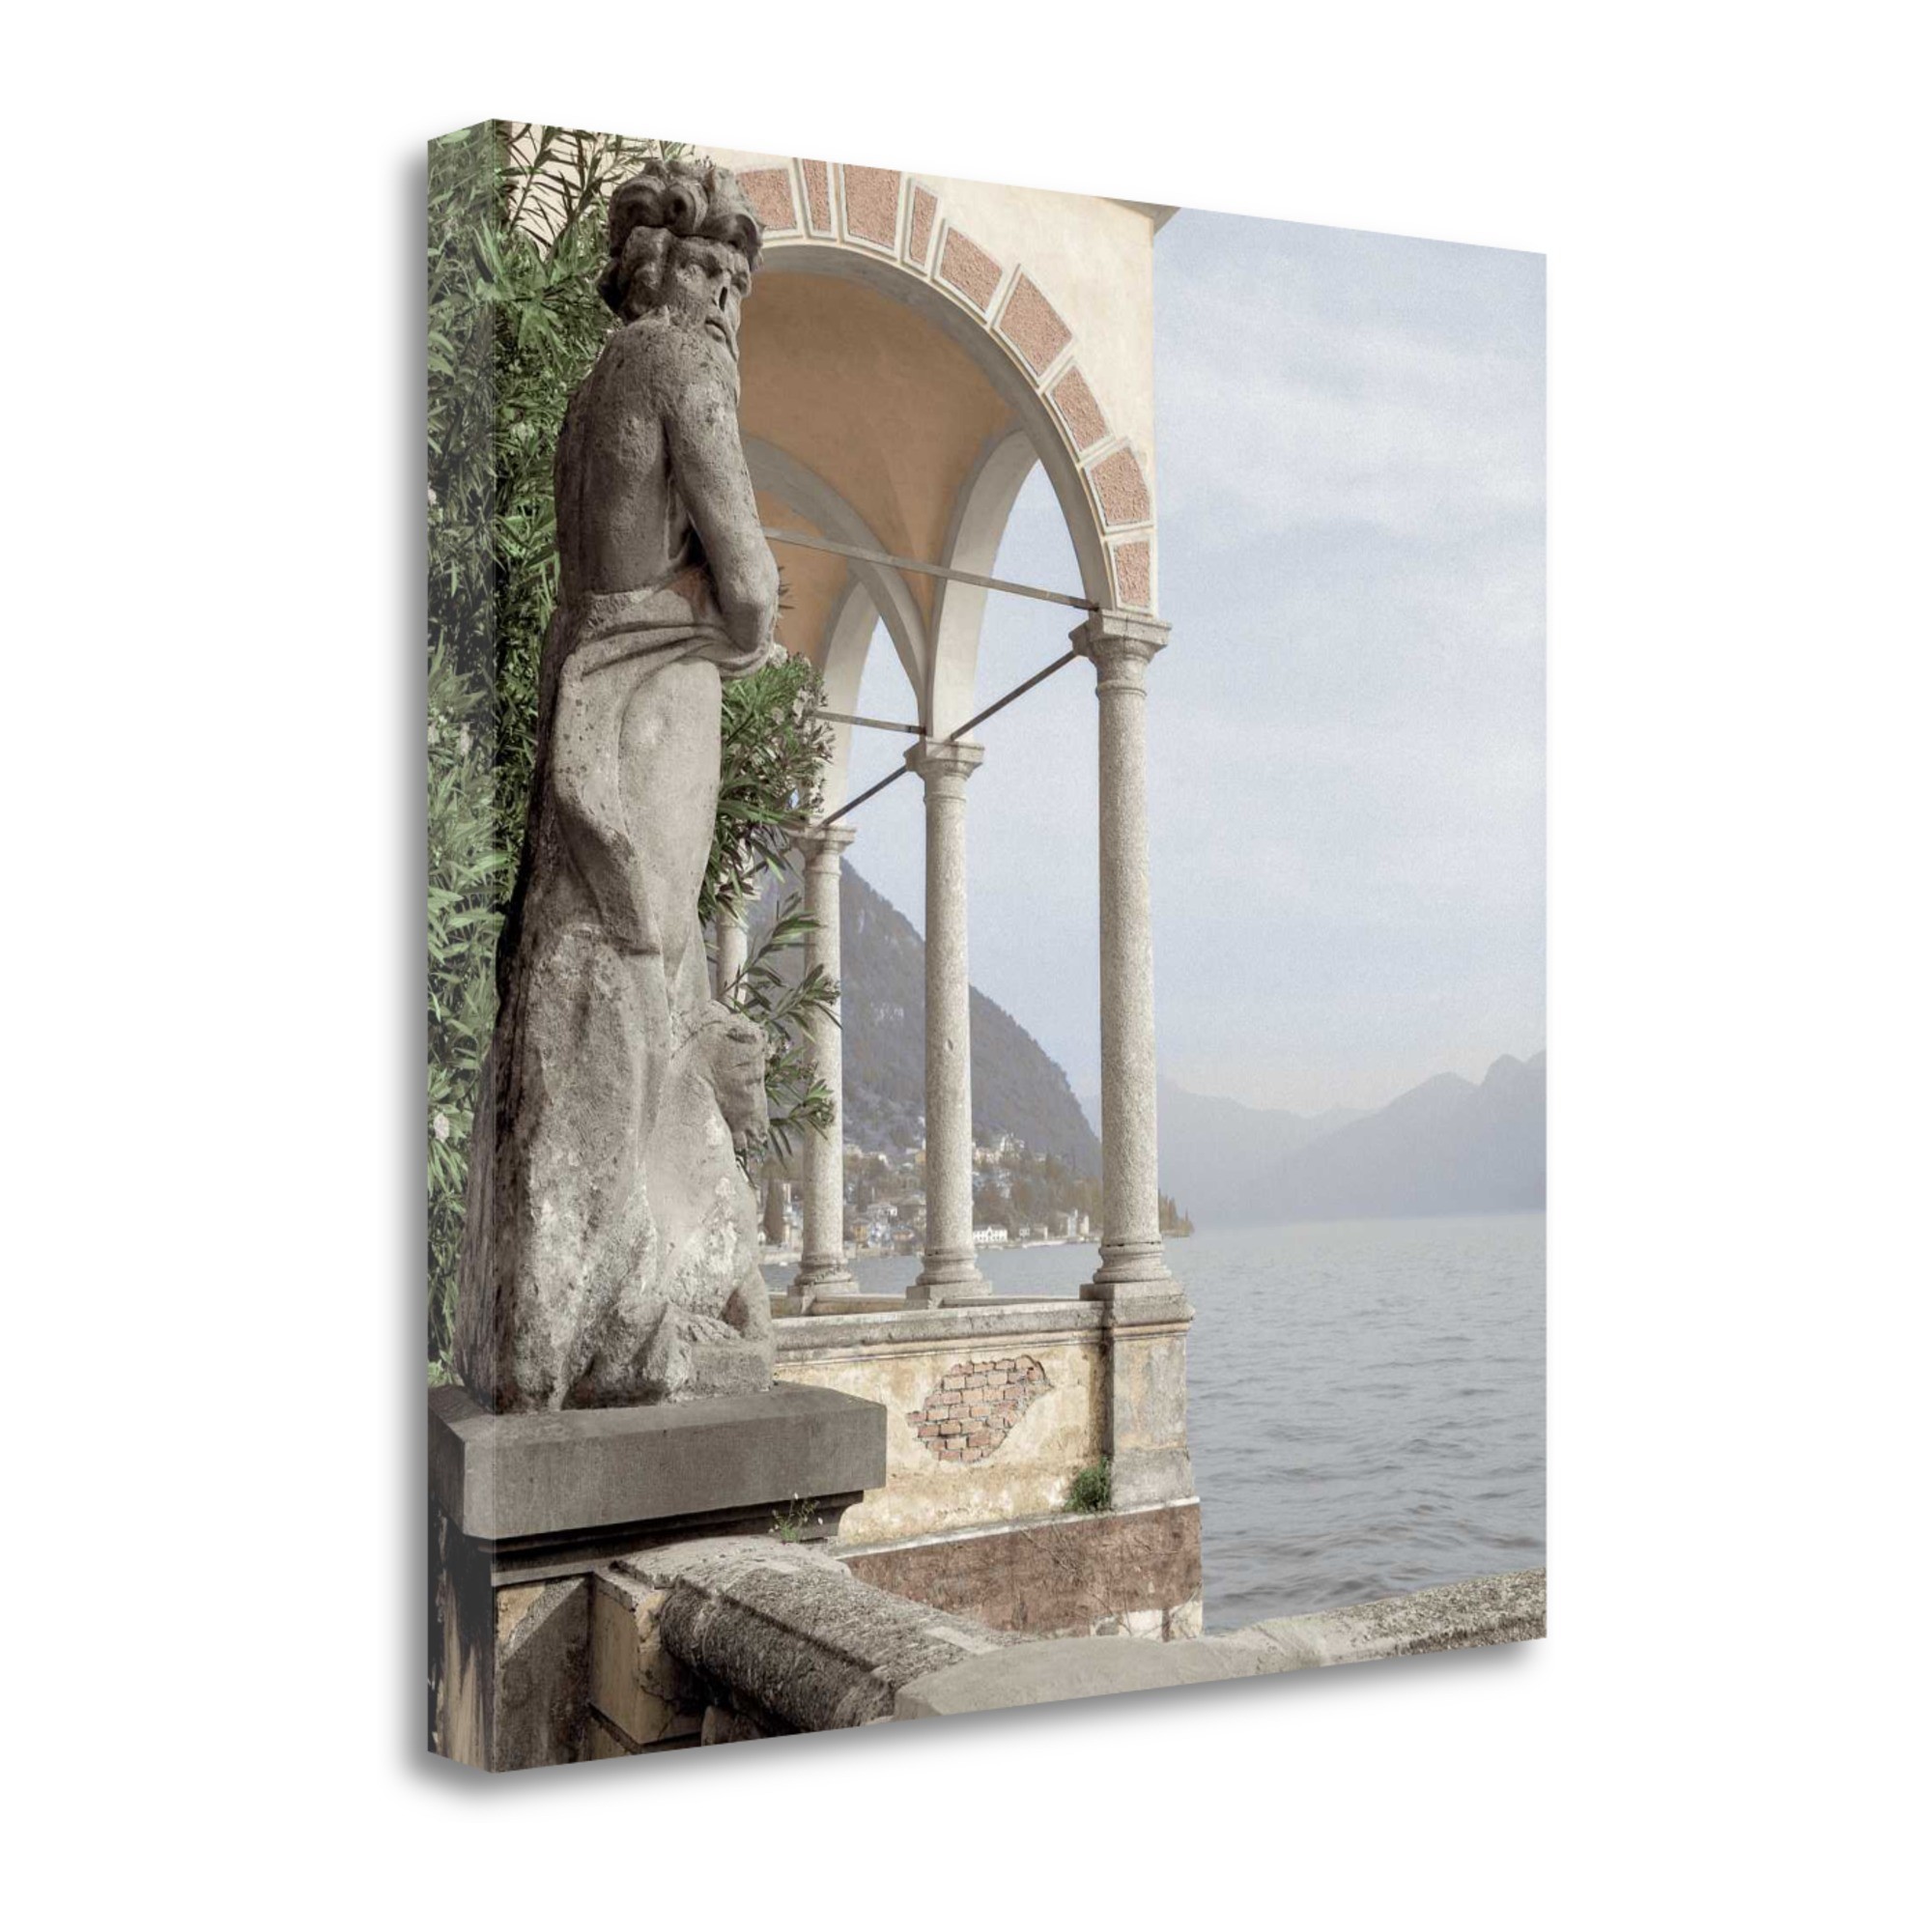 35" Ancient European Sculpture with Water View Giclee Wrap Canvas Wall Art